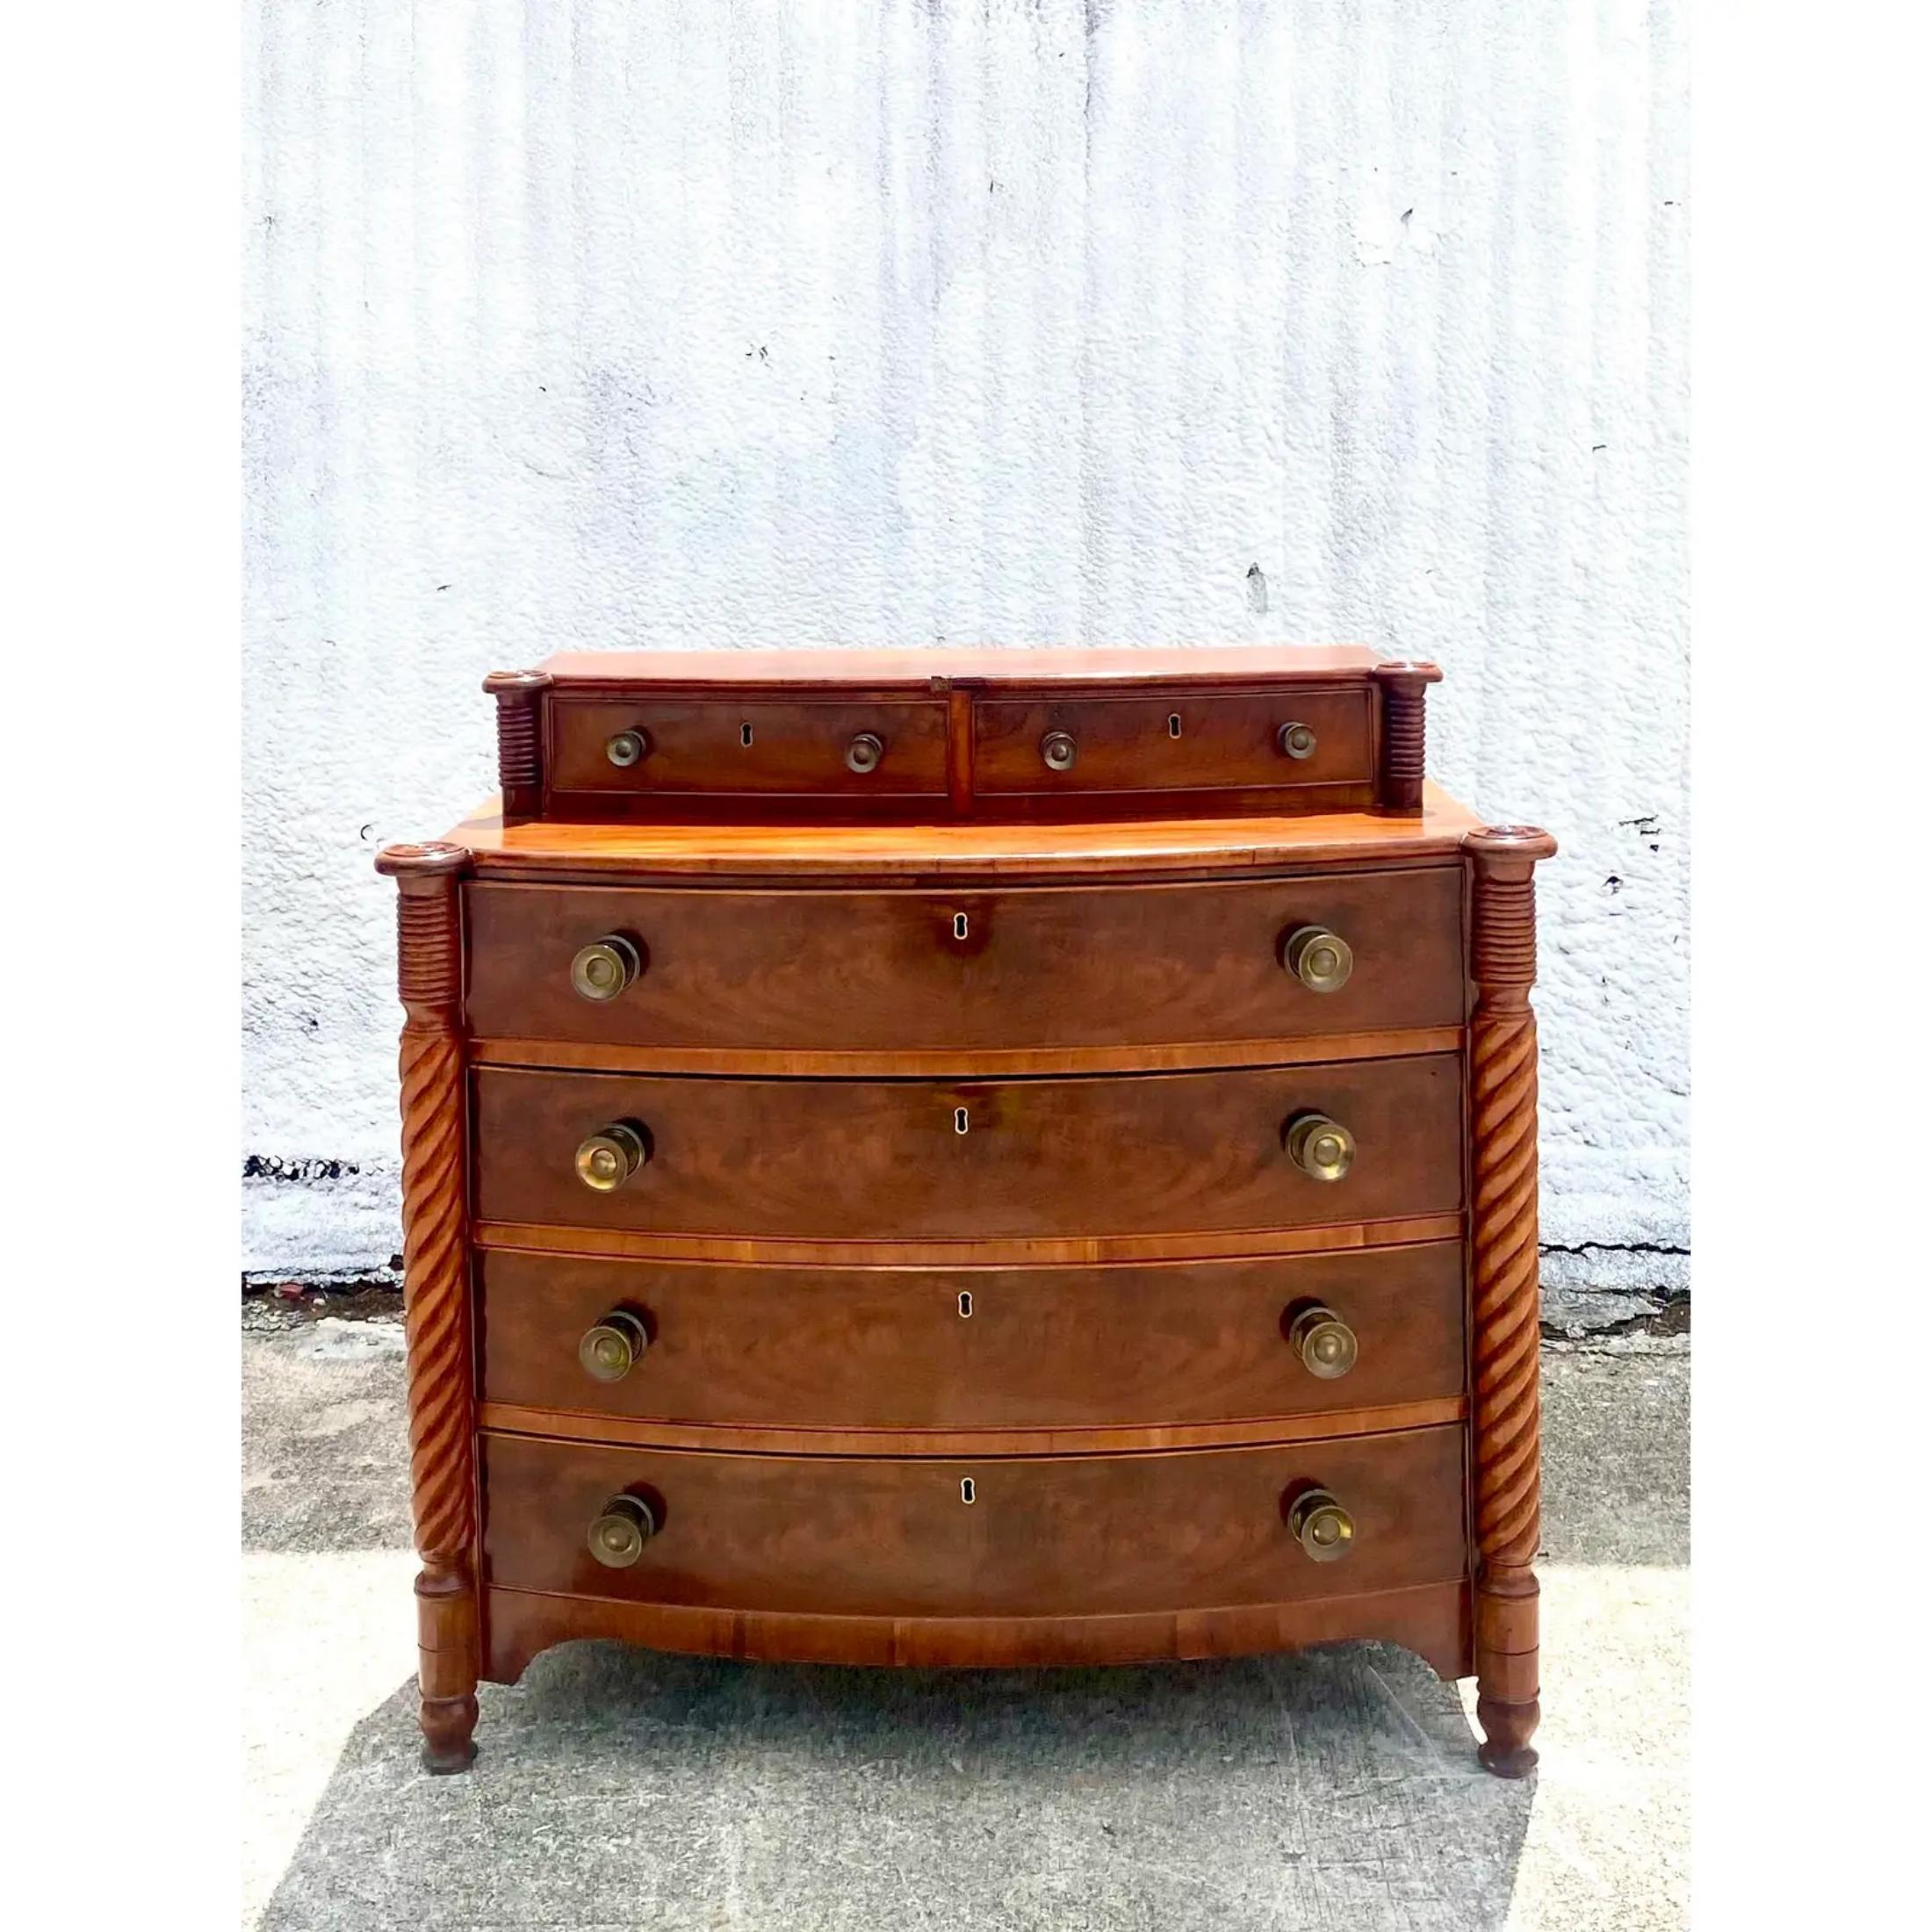 Incredible vintage American chest of drawers. Sheraton style approx 1850s. Beautiful turned wood detail and wood grain detail. Bi level with additional drawers on top. Amazing brass hardware